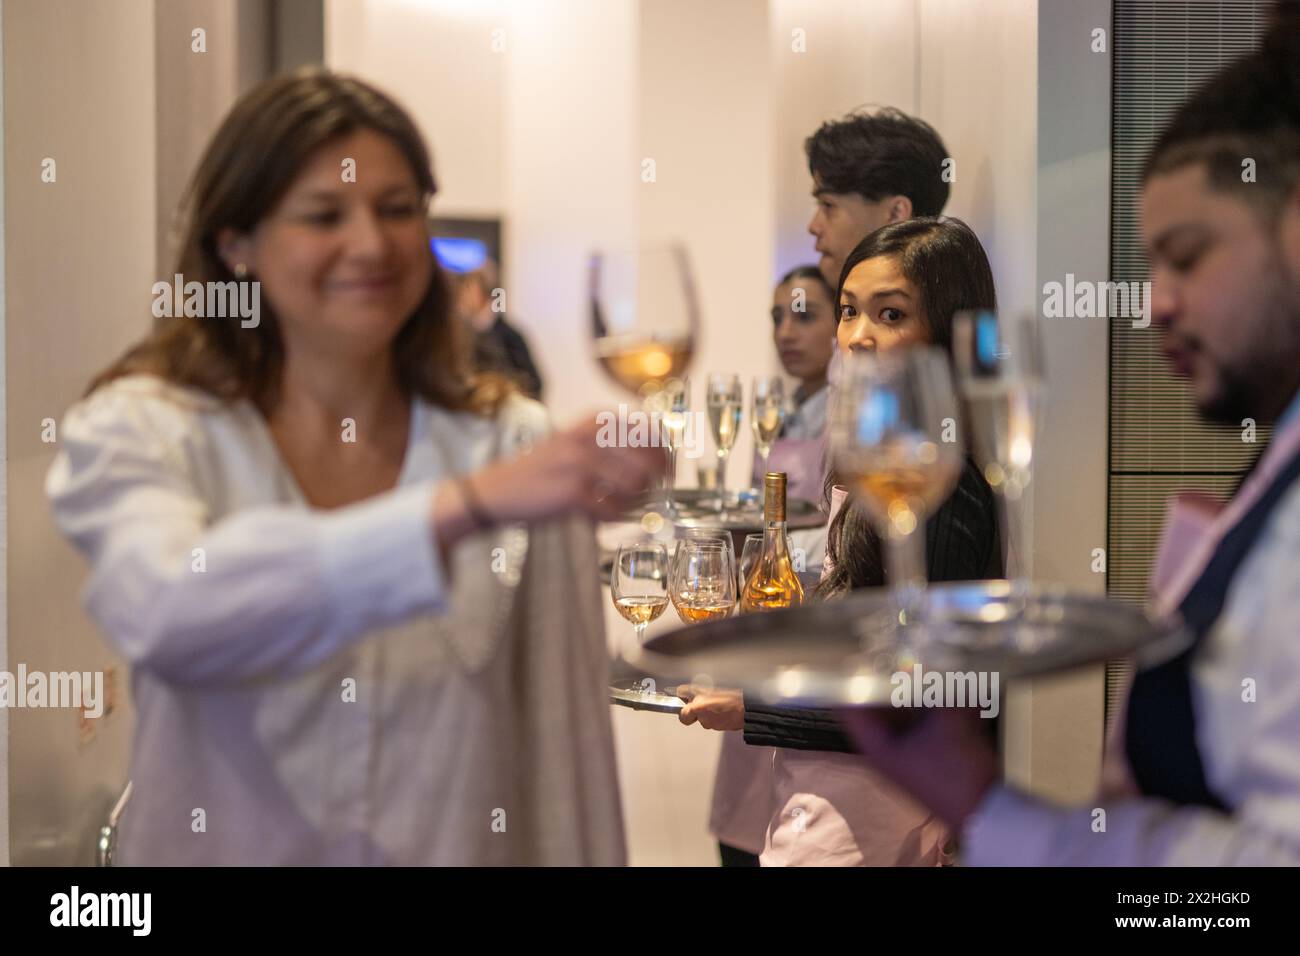 Guests being served wine at a corporate event. Photo date: Wednesday, September 27, 2023. Photo: Richard Gray/Alamy Stock Photo